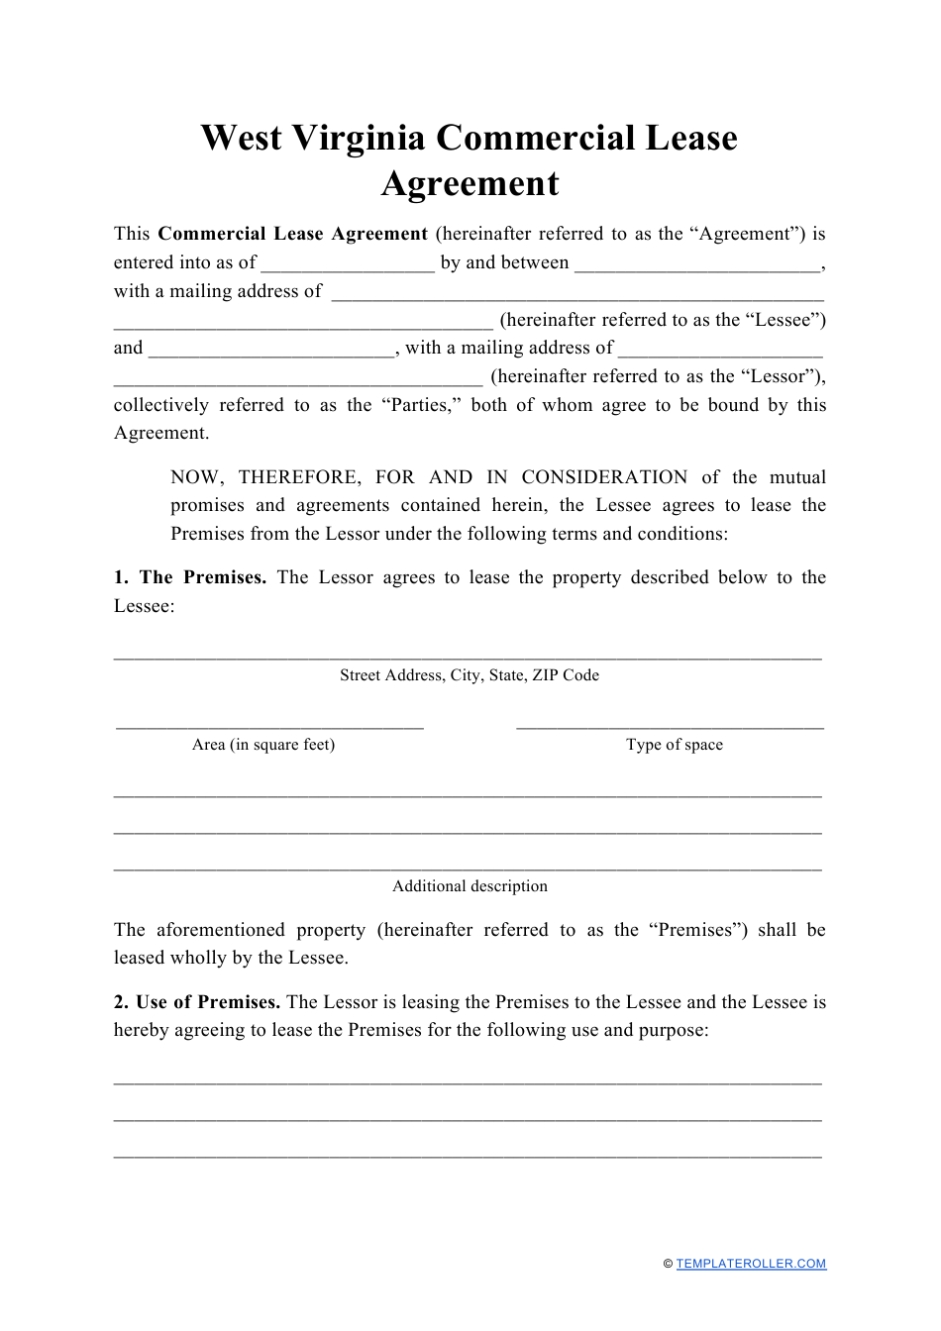 West Virginia Commercial Lease Agreement Template Download Printable Regarding Free Printable Commercial Lease Agreement Template